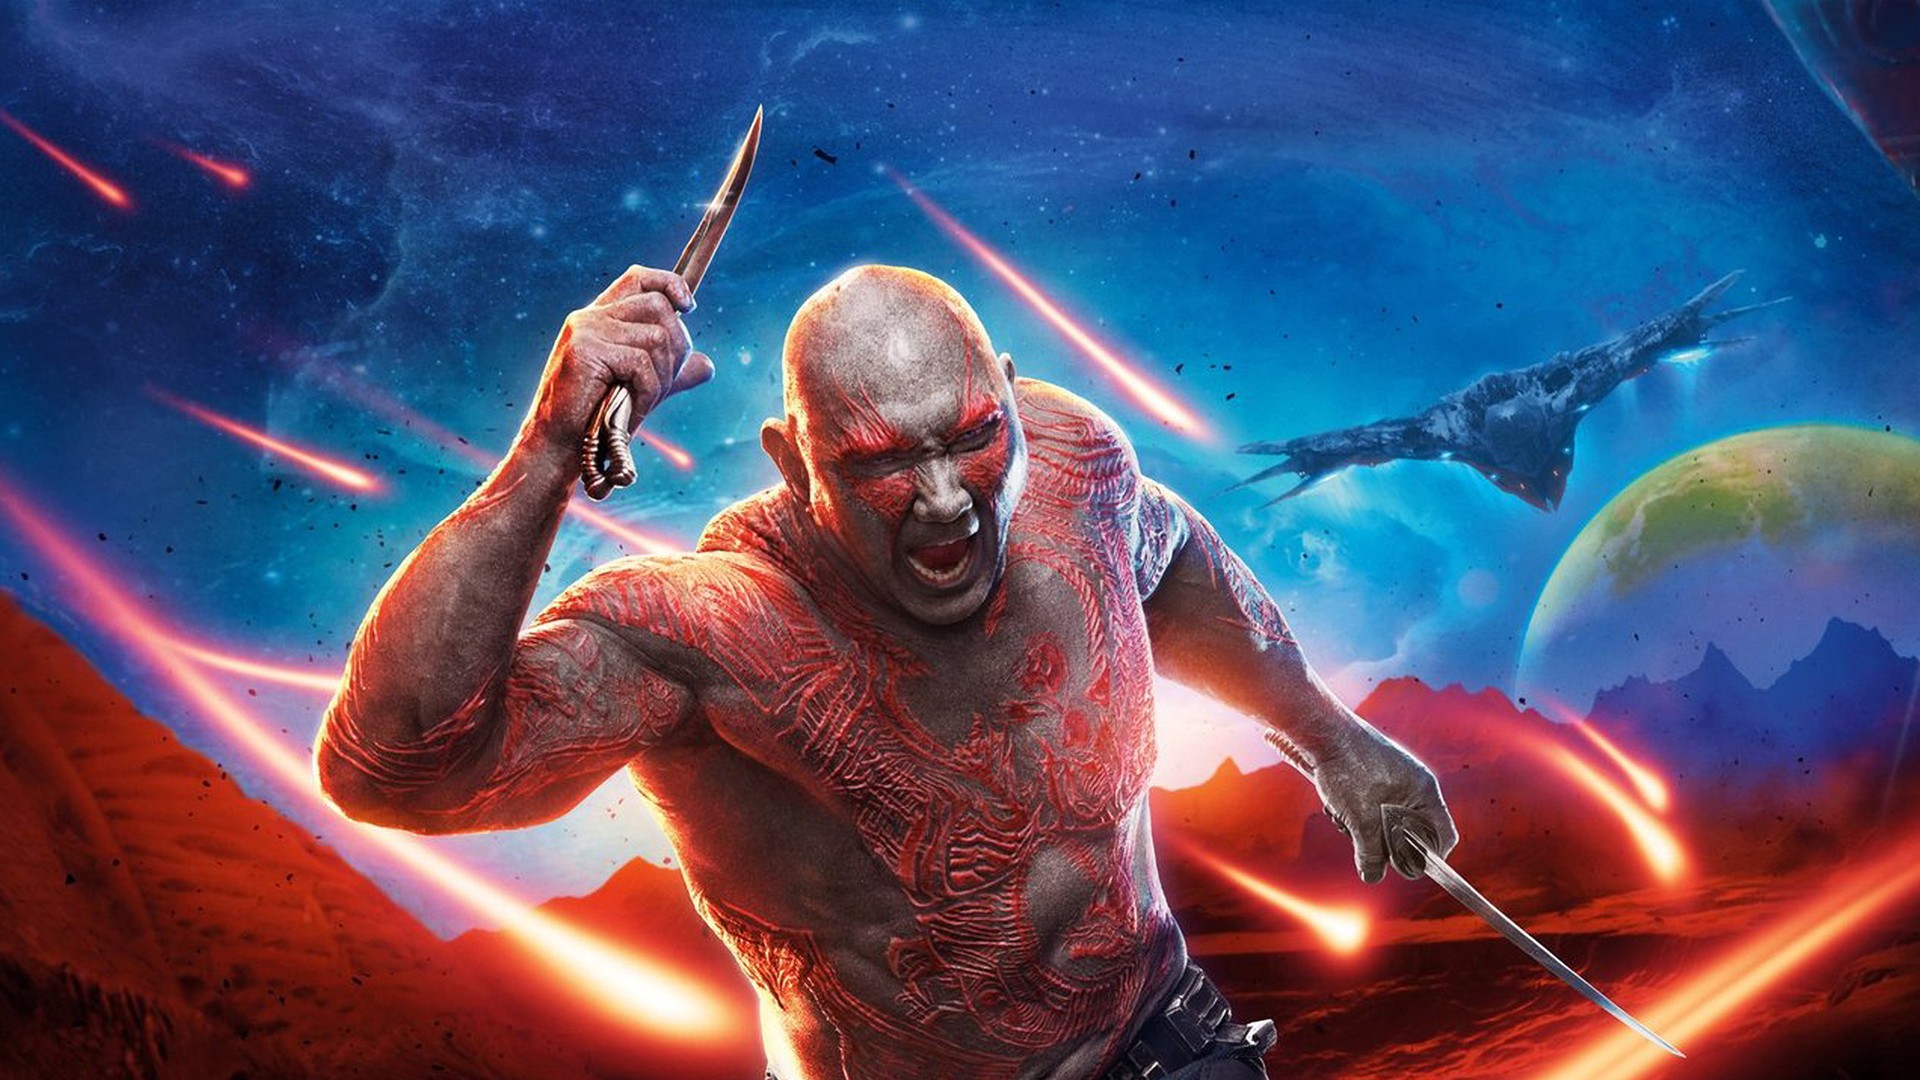 Drax the Destroyer, Dave Bautista, Guardians of the Galaxy Vol. 2, Marvel Cinematic Universe, Guardians of the Galaxy Wallpaper